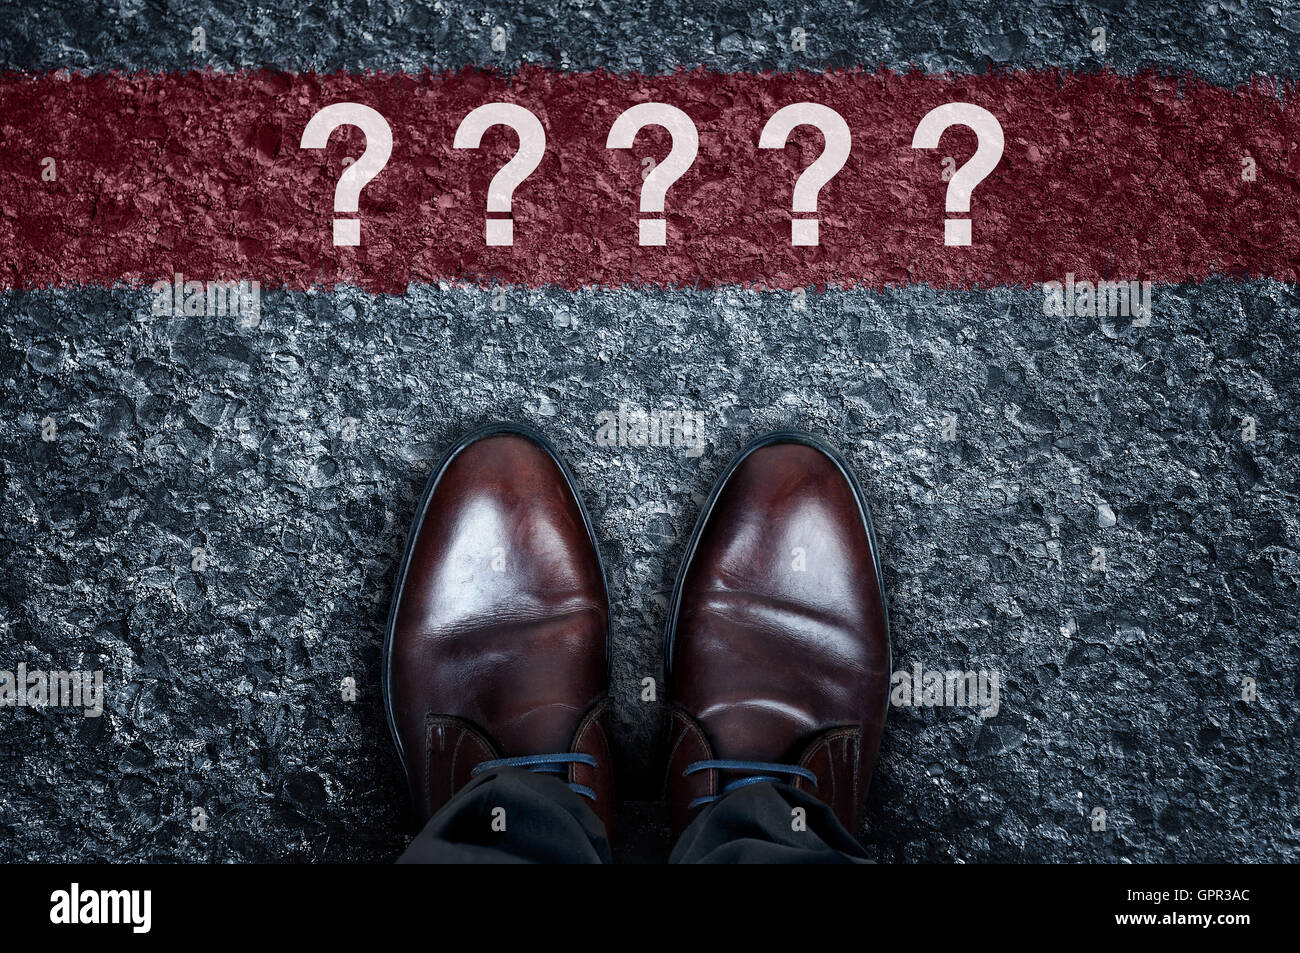 Question marks message on asphalt and business shoes Stock Photo